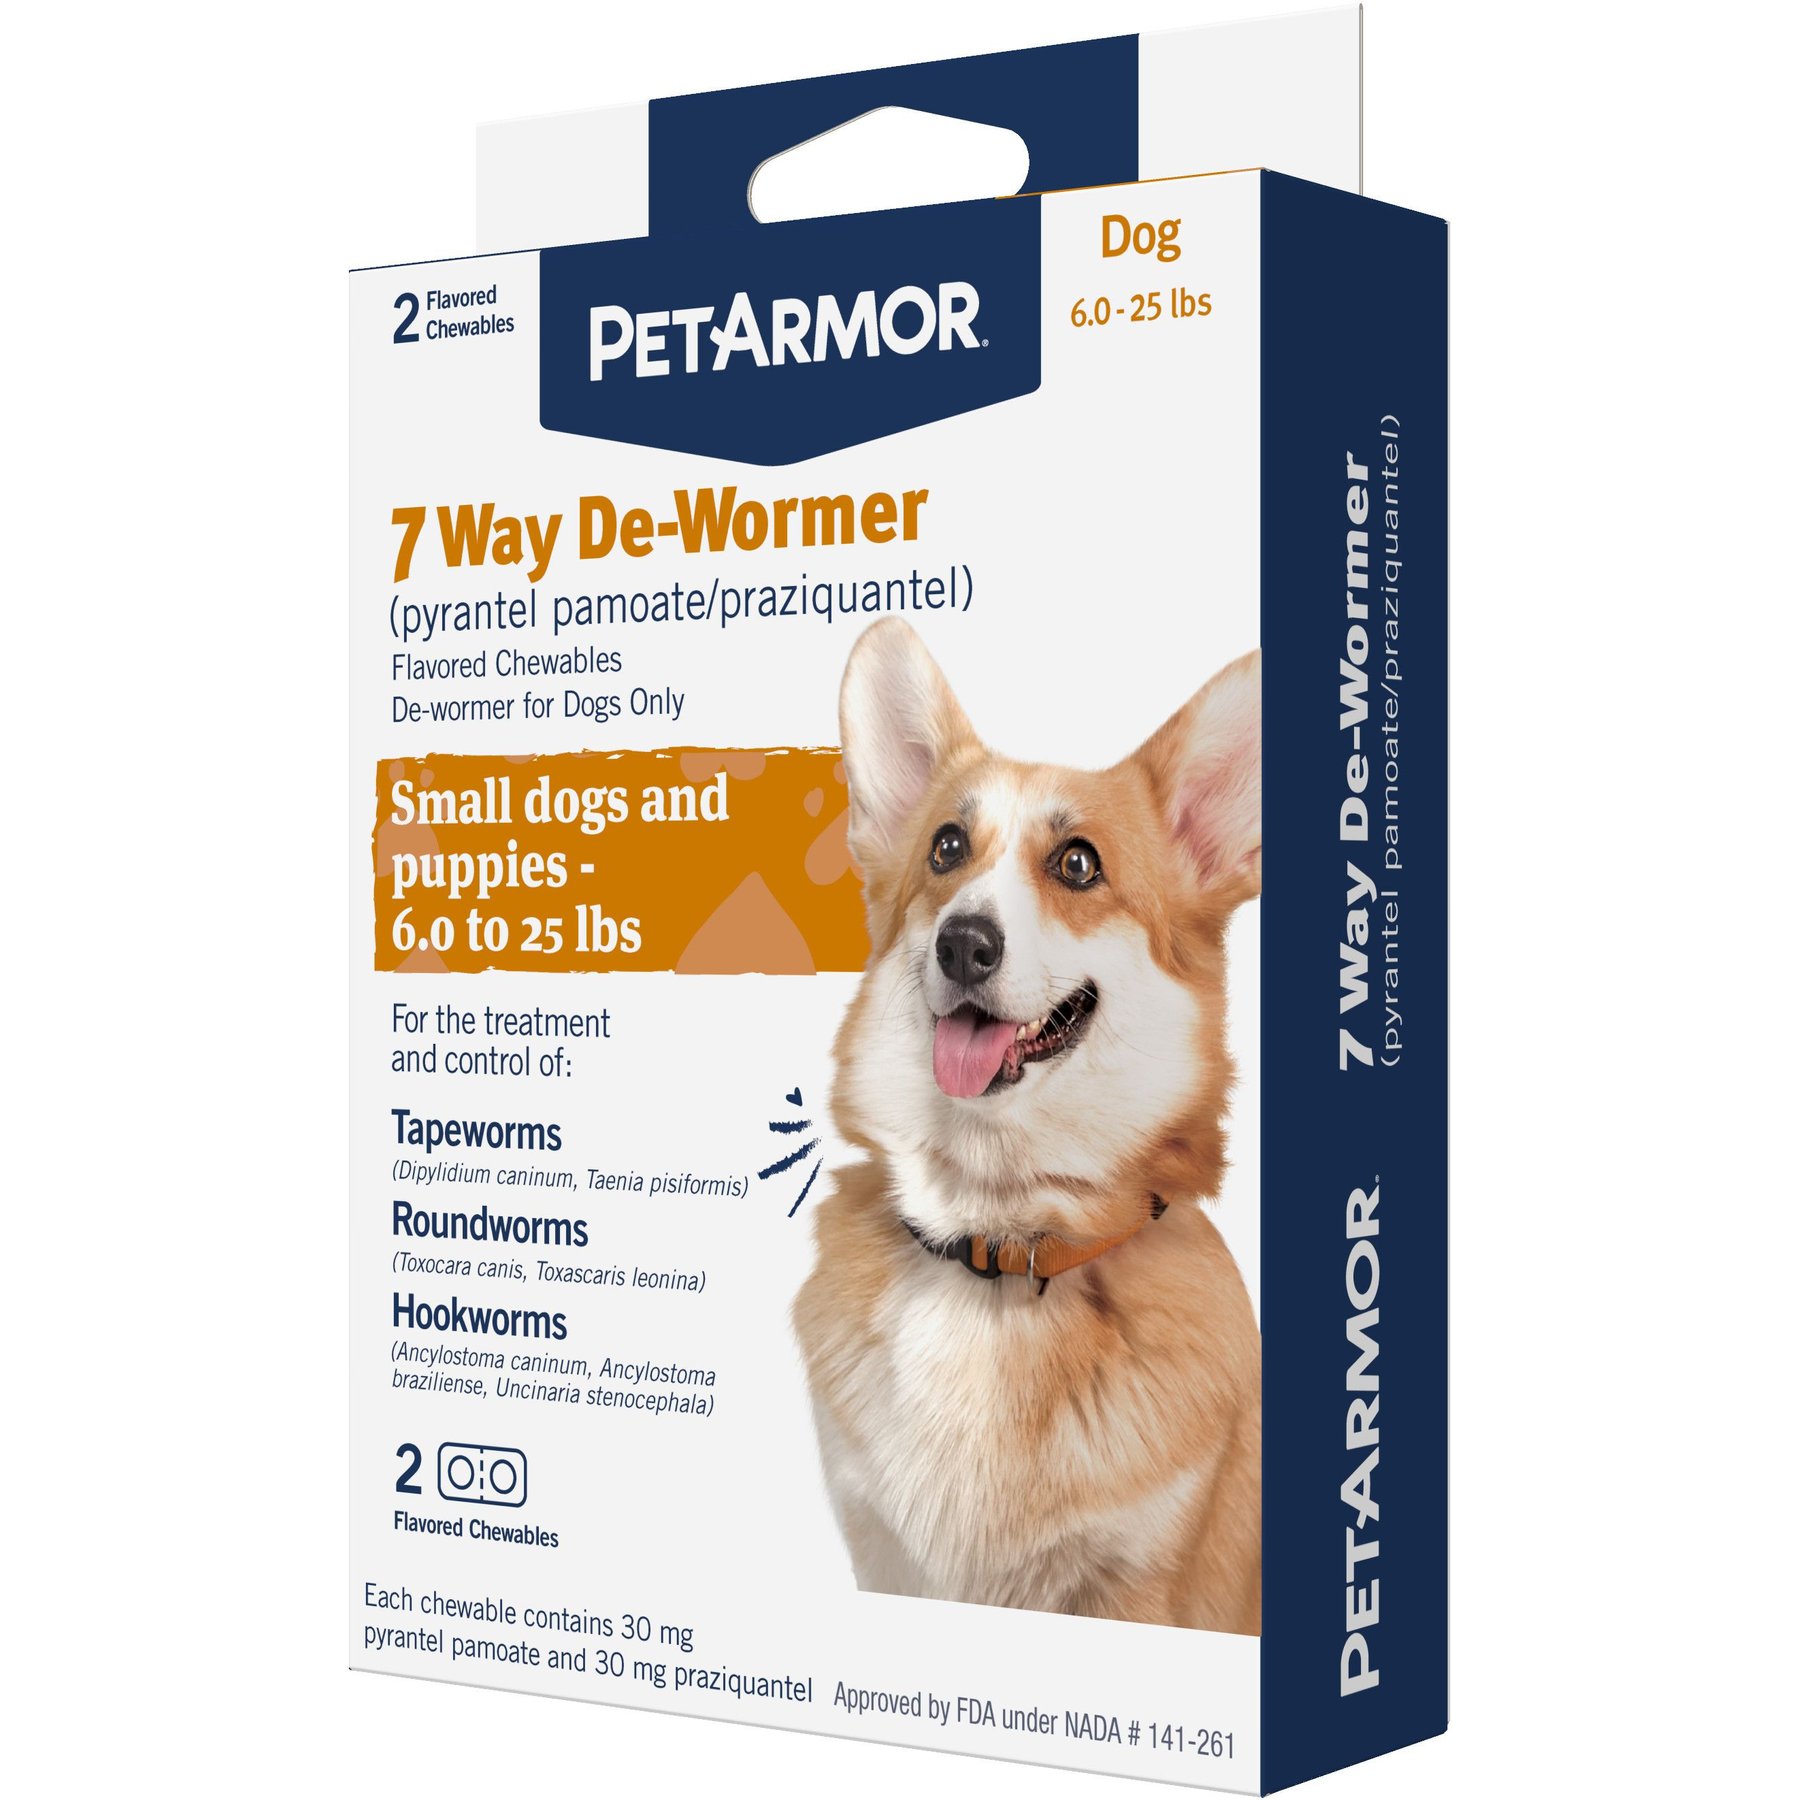 PetArmor 7 Way De-Wormer, for Puppies & Small Dogs 6-25 lbs, Chewable Flavored Tablets - 2 tablets